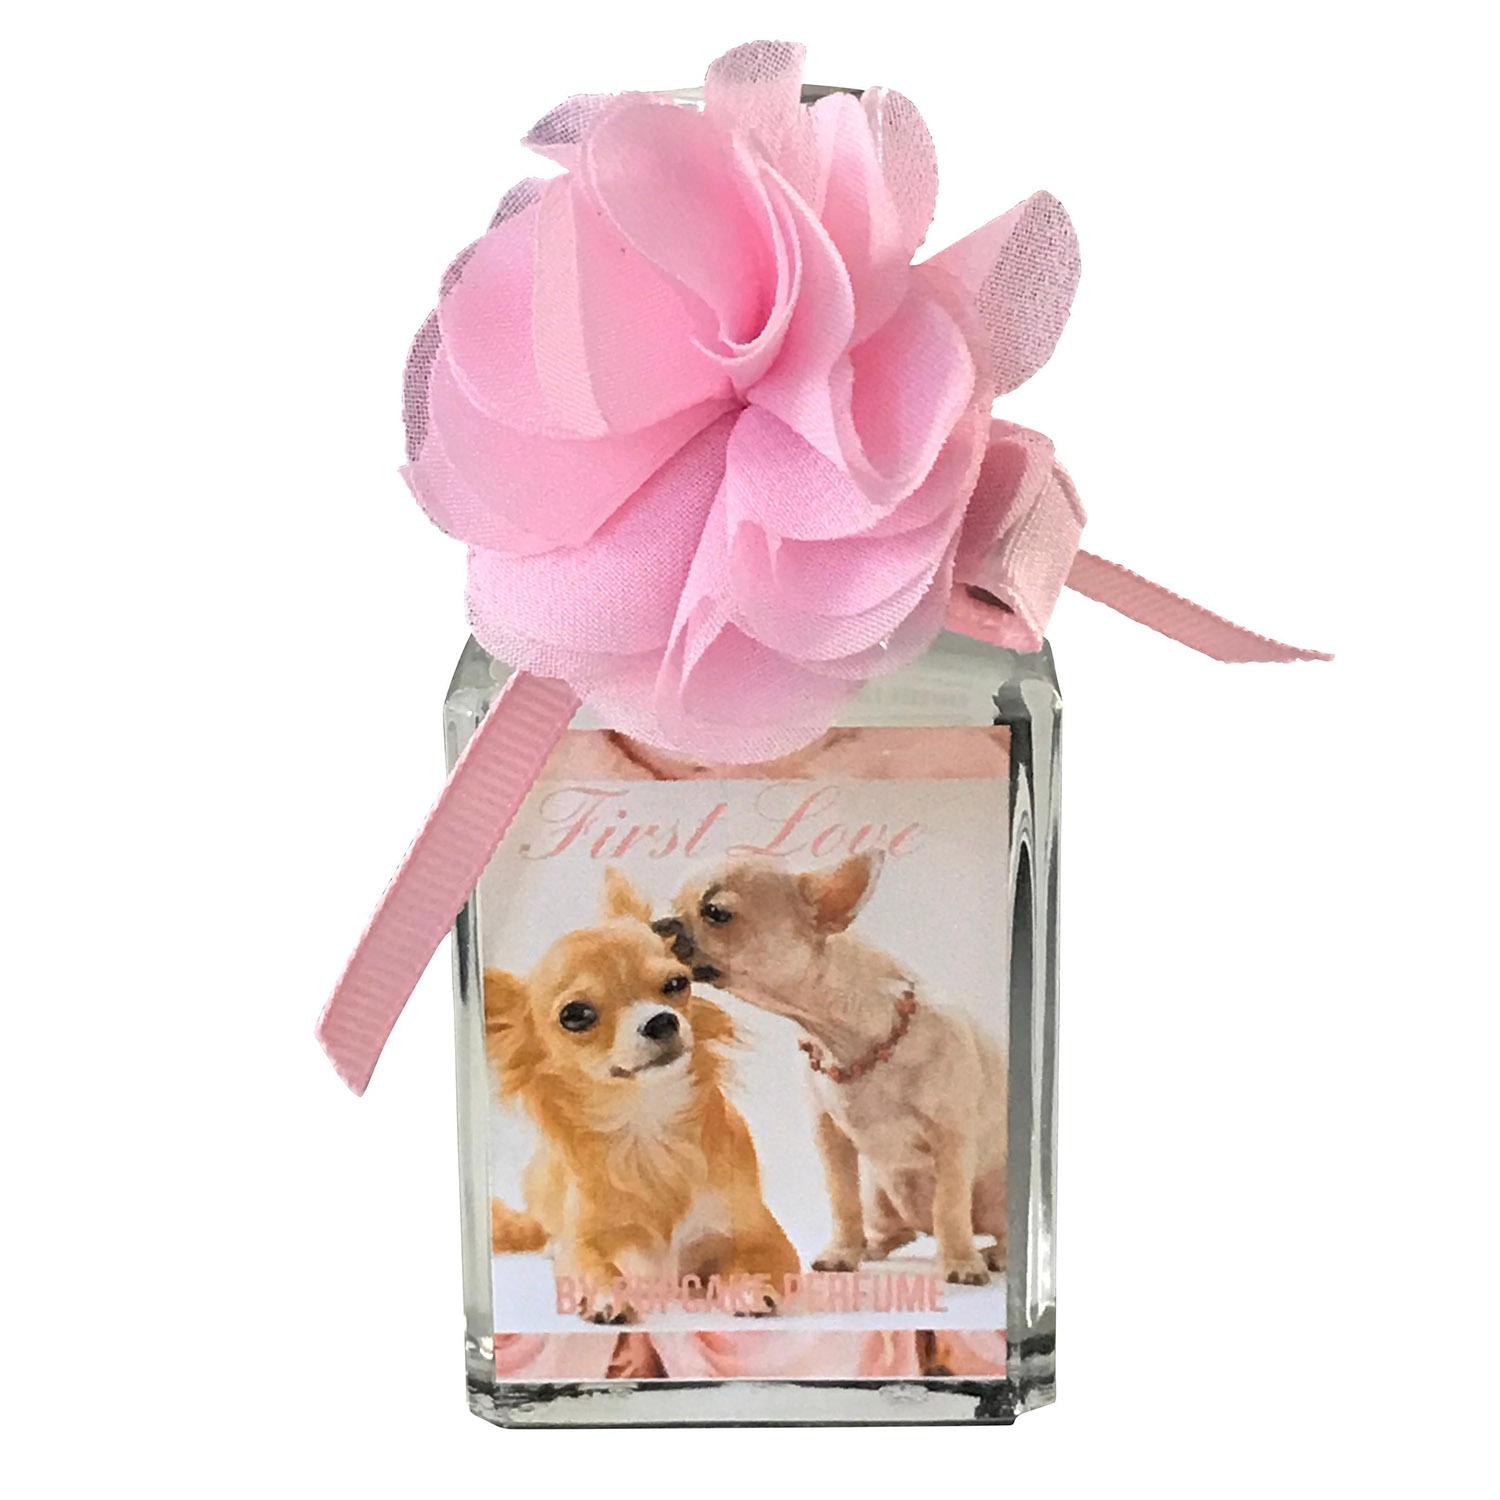 The Dog Squad Pupcake Perfume for Dogs - First Love